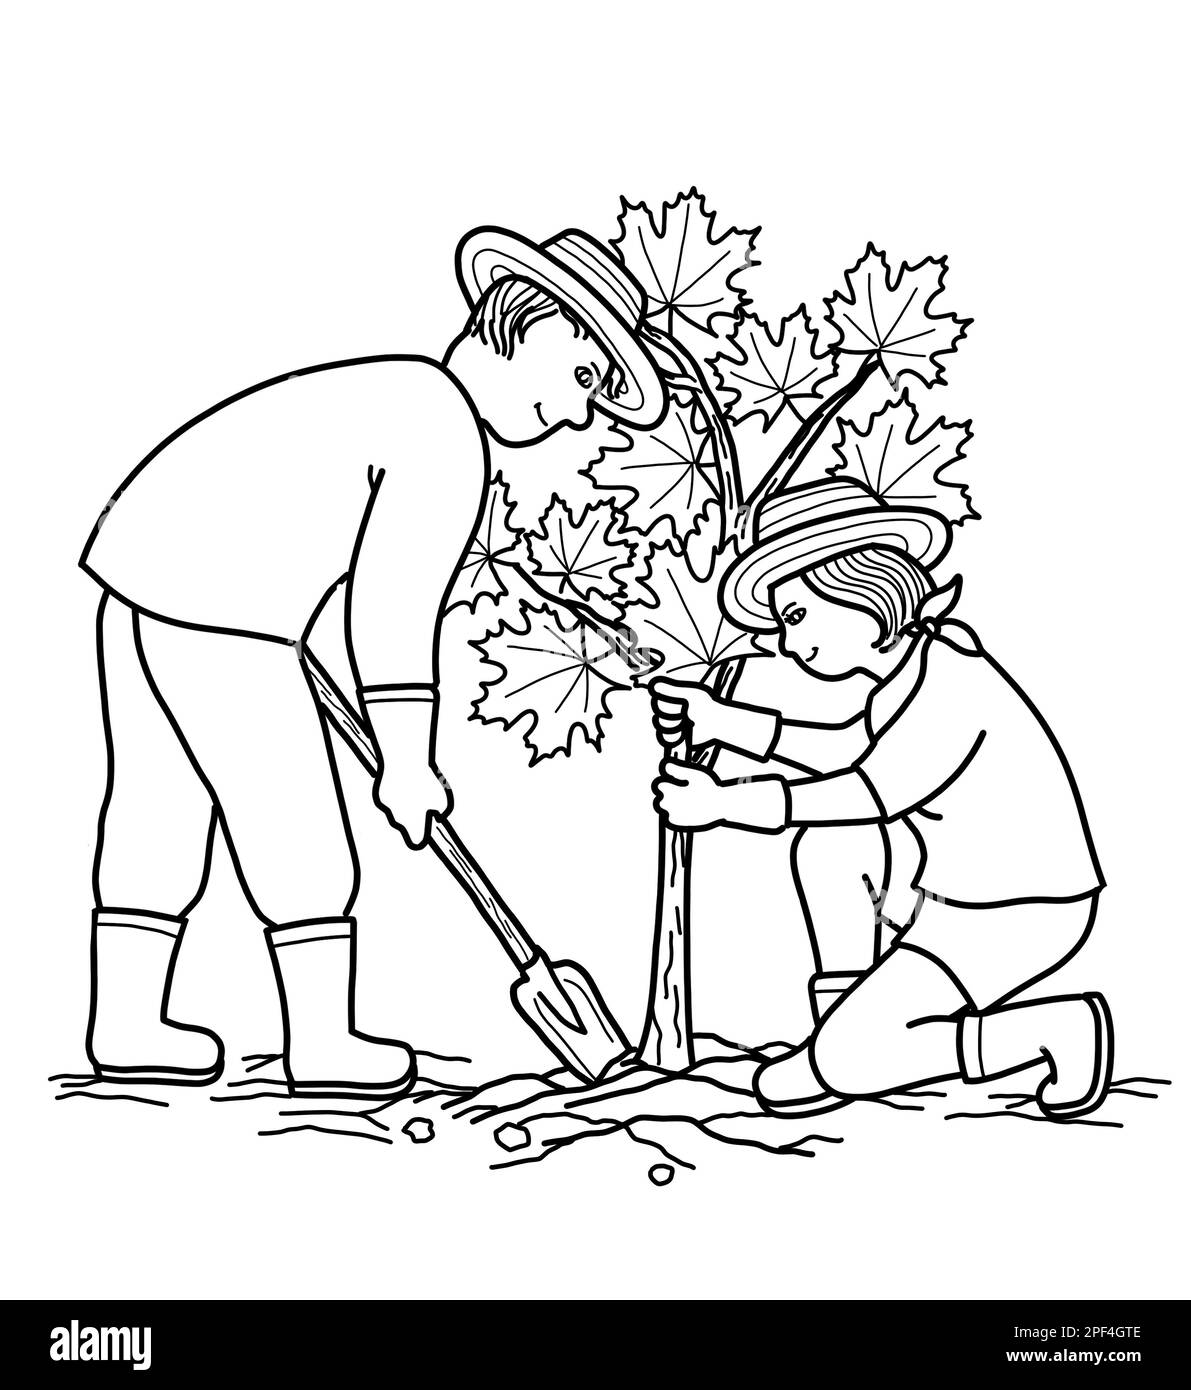 Man And Woman Planting Tree Gardening Vector Illustration Hand Drawing  Royalty Free SVG, Cliparts, Vectors, and Stock Illustration. Image  112066976.